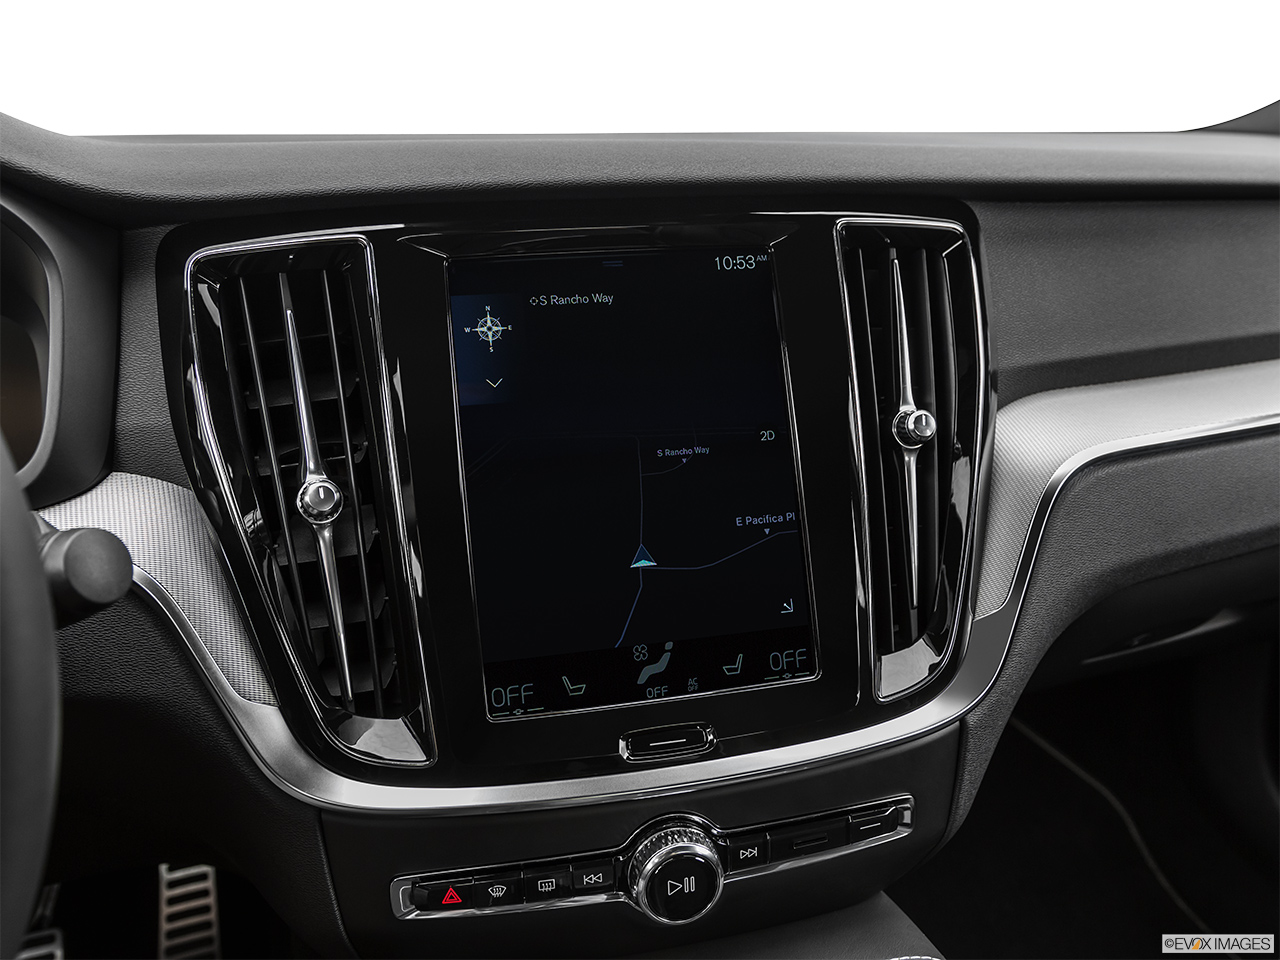 2020 Volvo S60 T8 R-Design eAWD Plug-in Hybrid Driver position view of navigation system. 